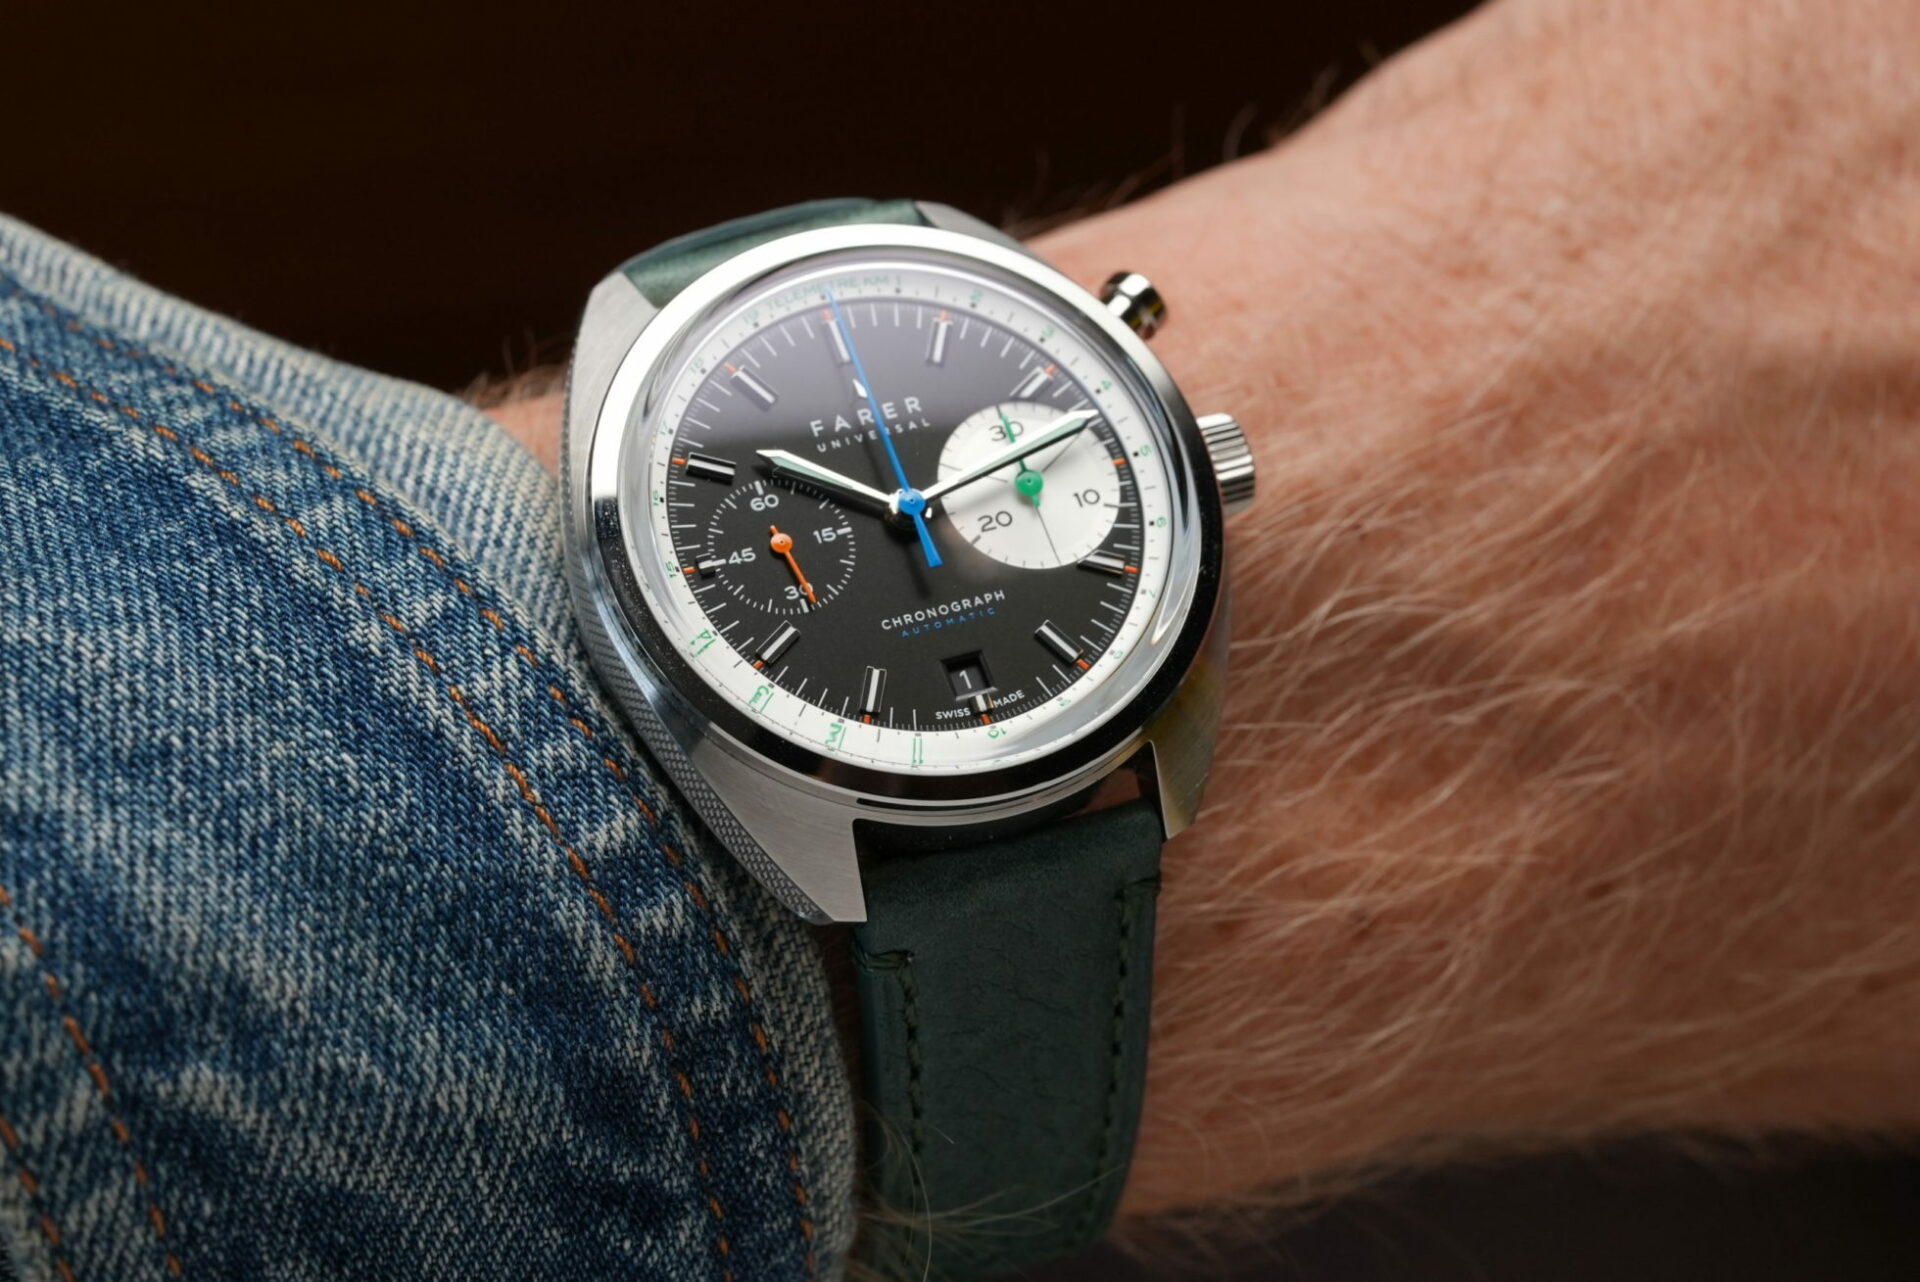 HANDS ON – The Farer Segrave Monopusher Chronograph delivers a big eye with a colourful twist